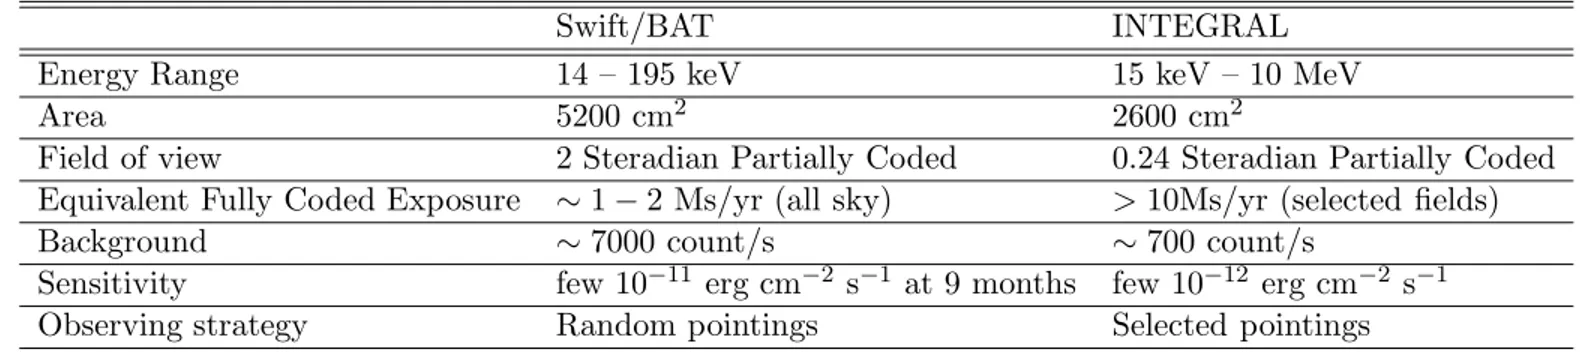 Table 3.5: An overview of the Swift/BAT and INTEGRAL Surveys.